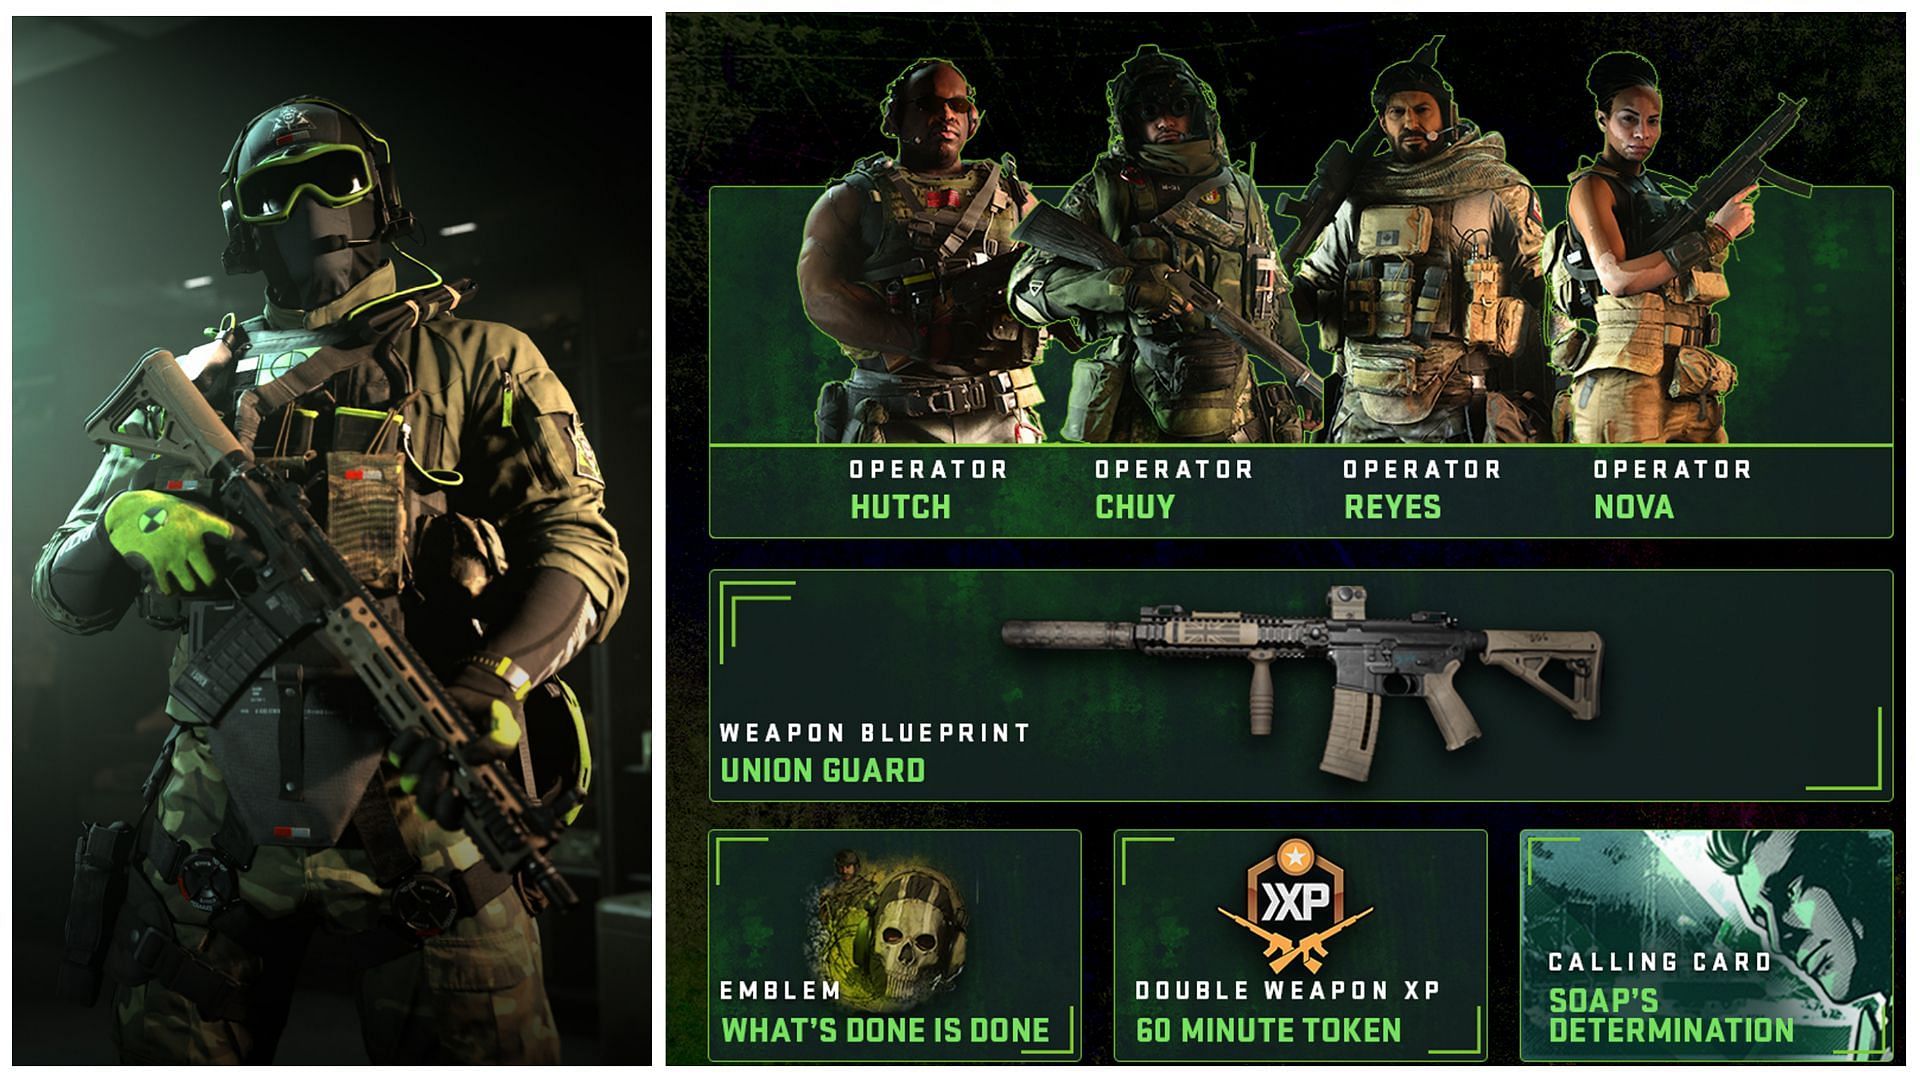 All campaign rewards for Modern Warfare 2 multiplayer and warzone 2.0 revealed (Image via callofduty.com)